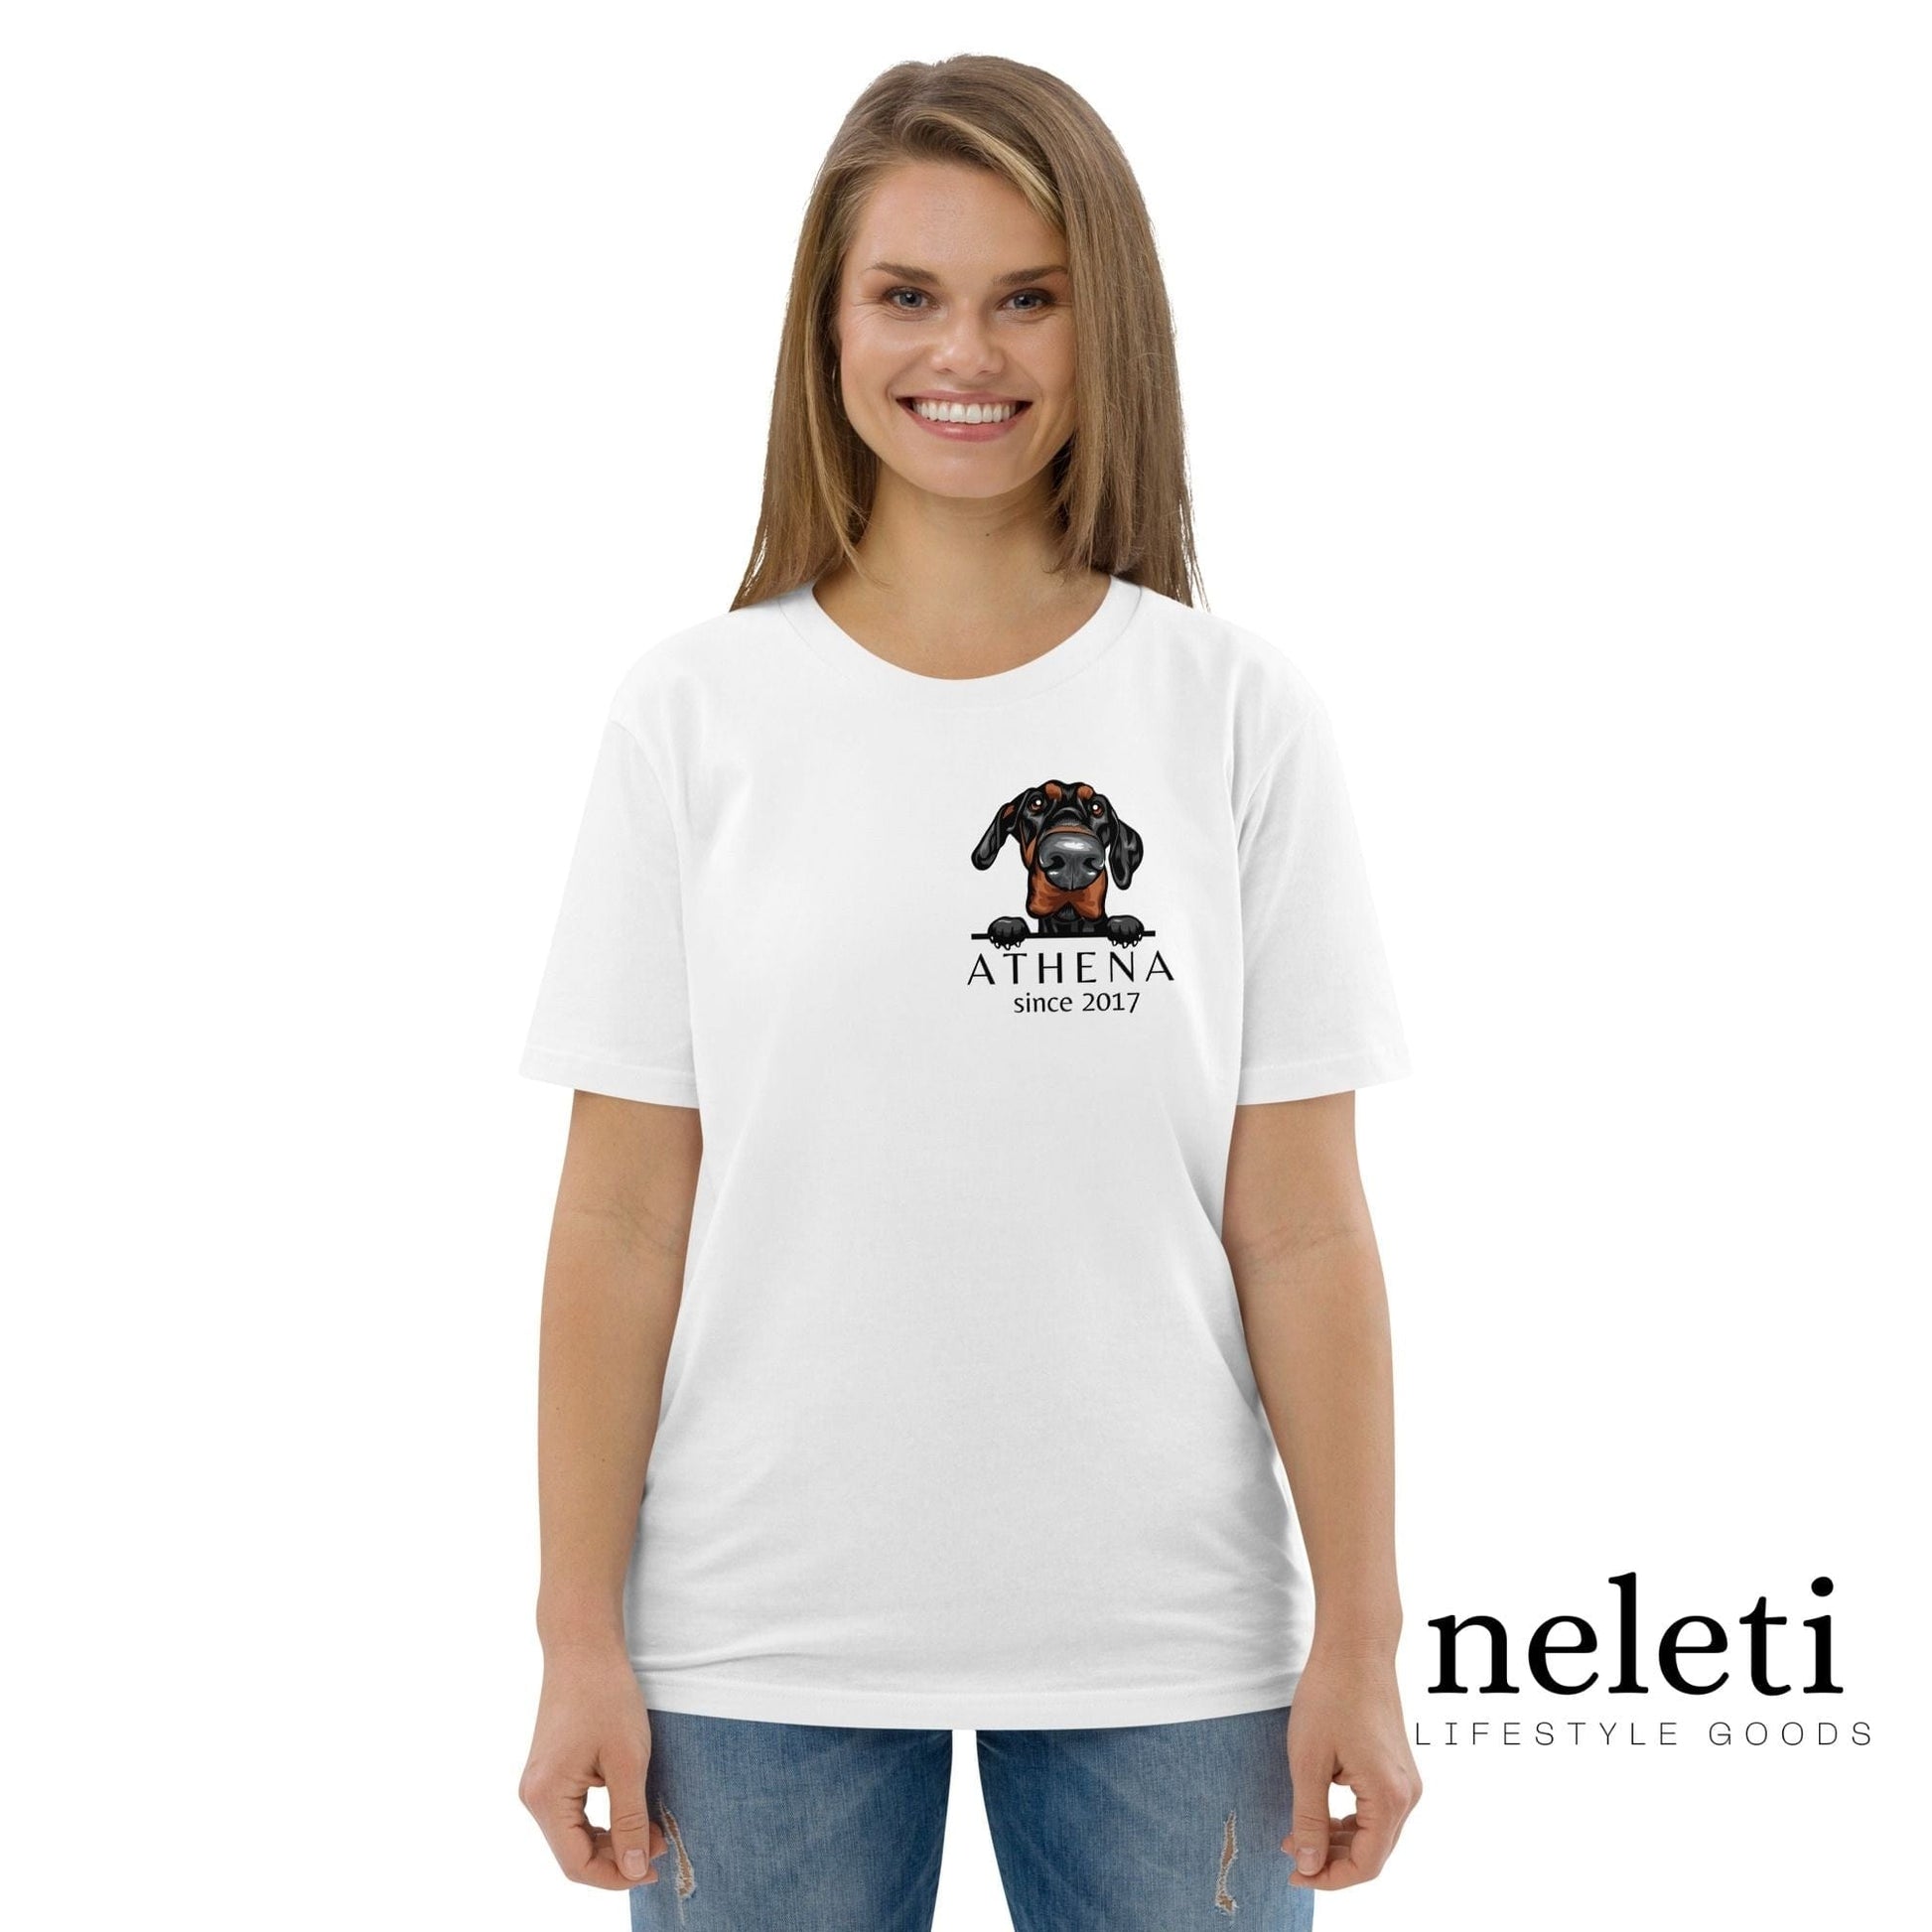 Personalised Organic Cotton T-shirt With Dog On Personalised -  Israel